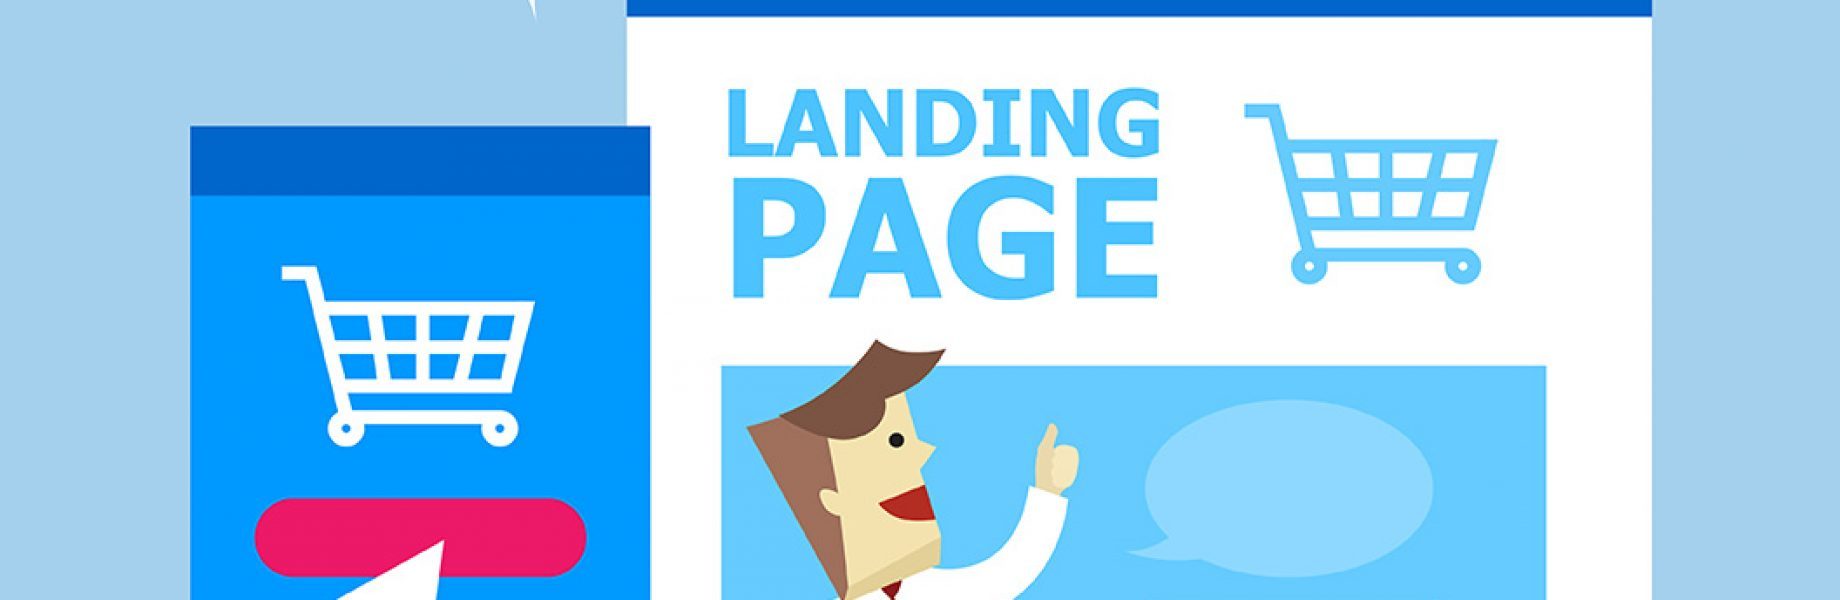 Landing page: appvizer releases a new free tool for lead generation